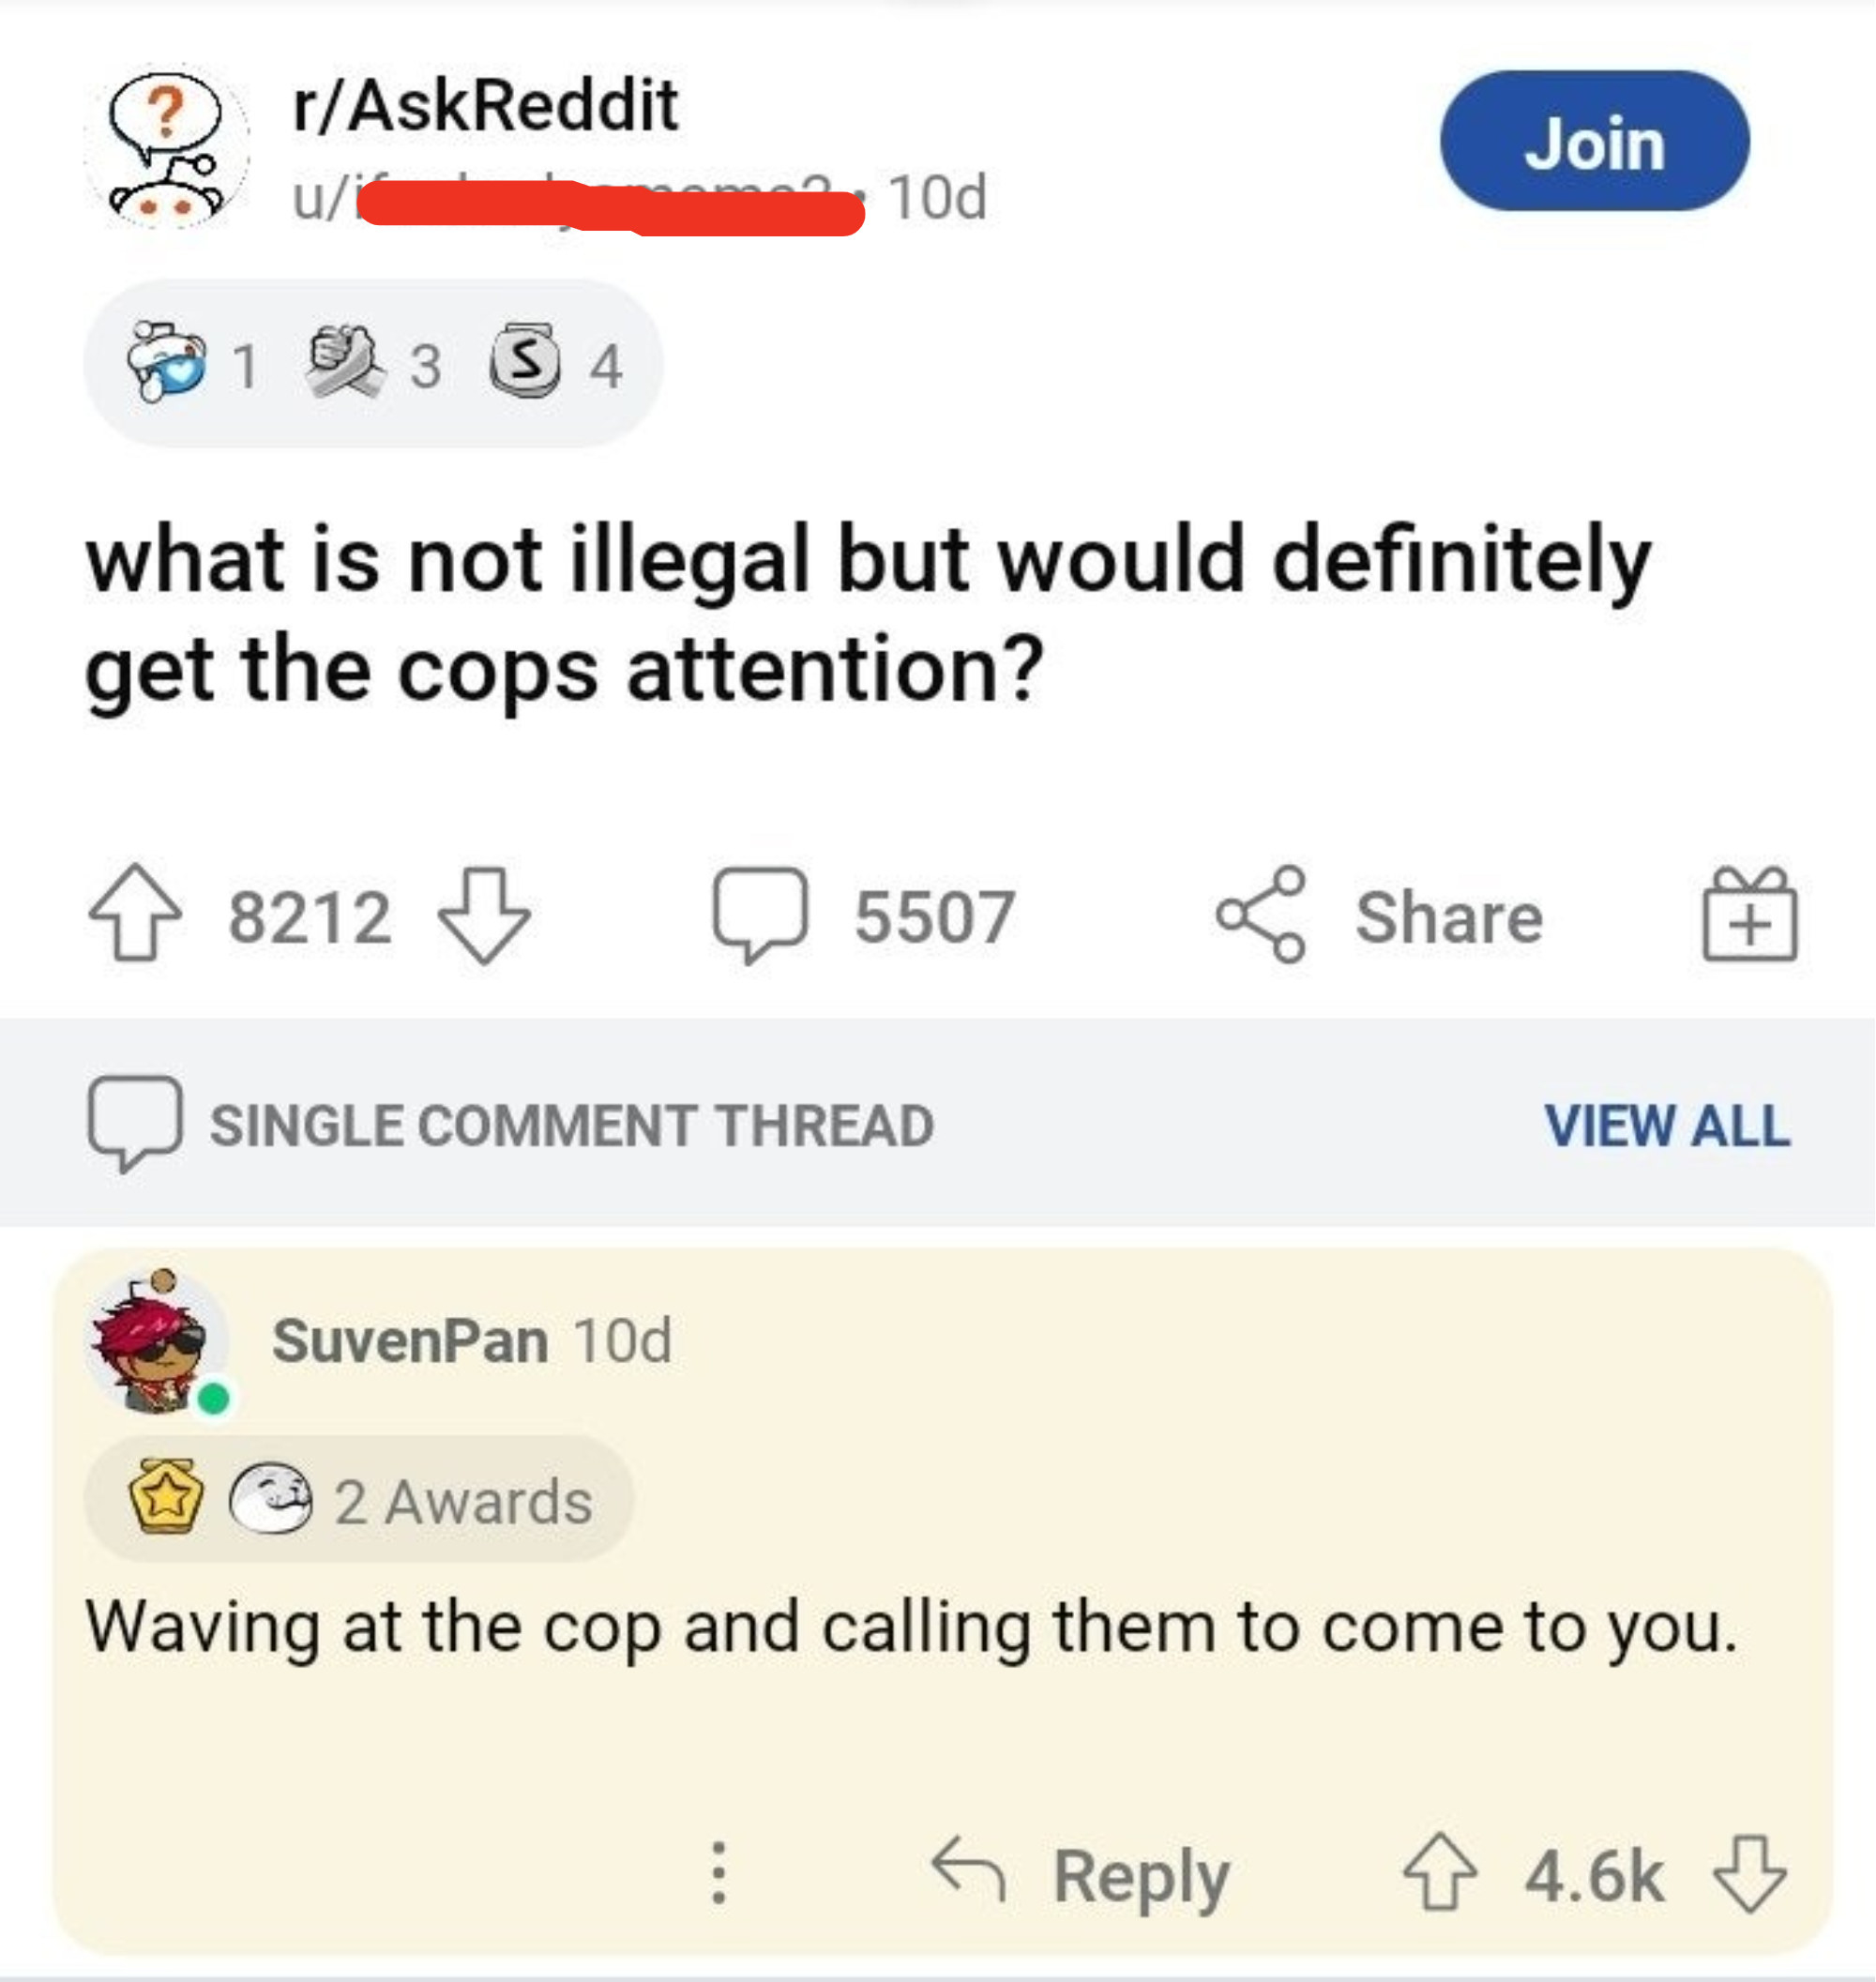 Someone asks what&#x27;s not illegal but would get a cop&#x27;s attention, and someone responds waving at them and calling them to come to you